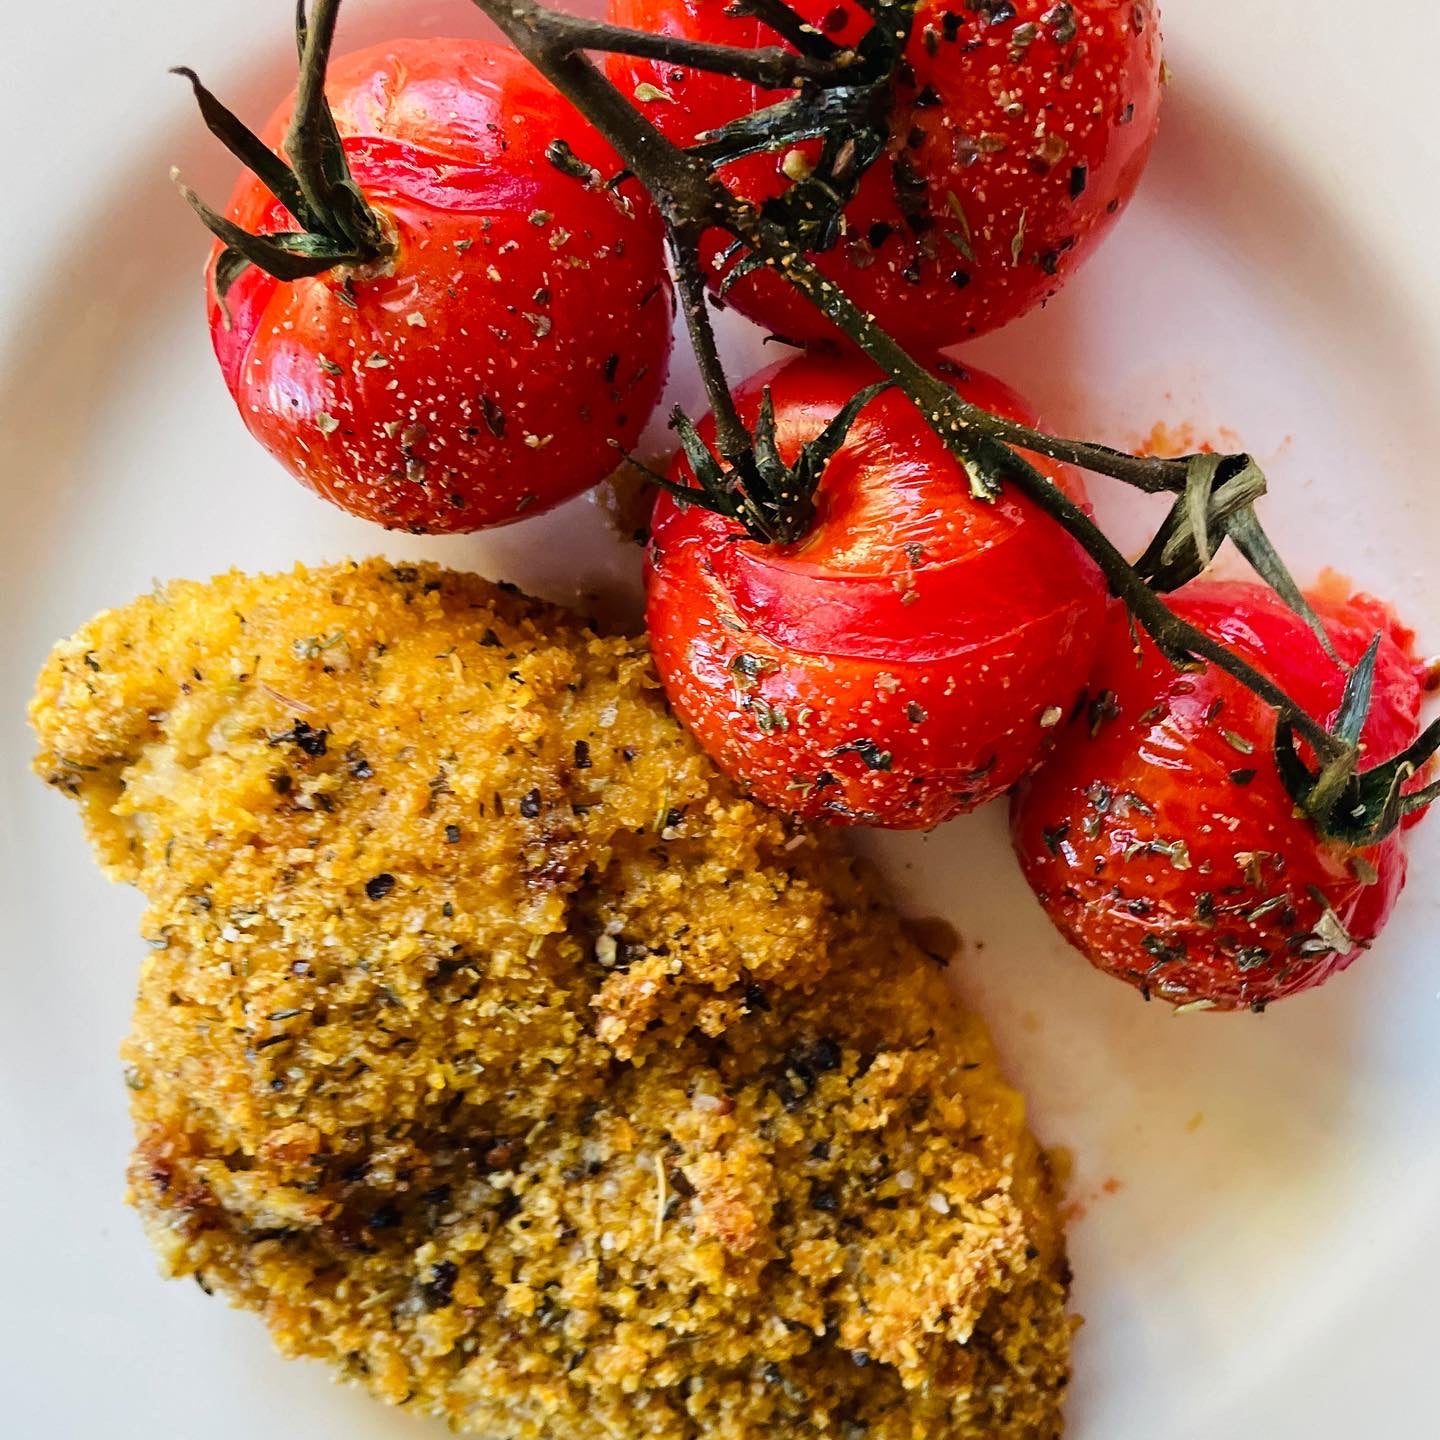 Two Medium Sized Ladies cornflake crusted baked chicken breast and roasted tomatoes on the vine original recipe